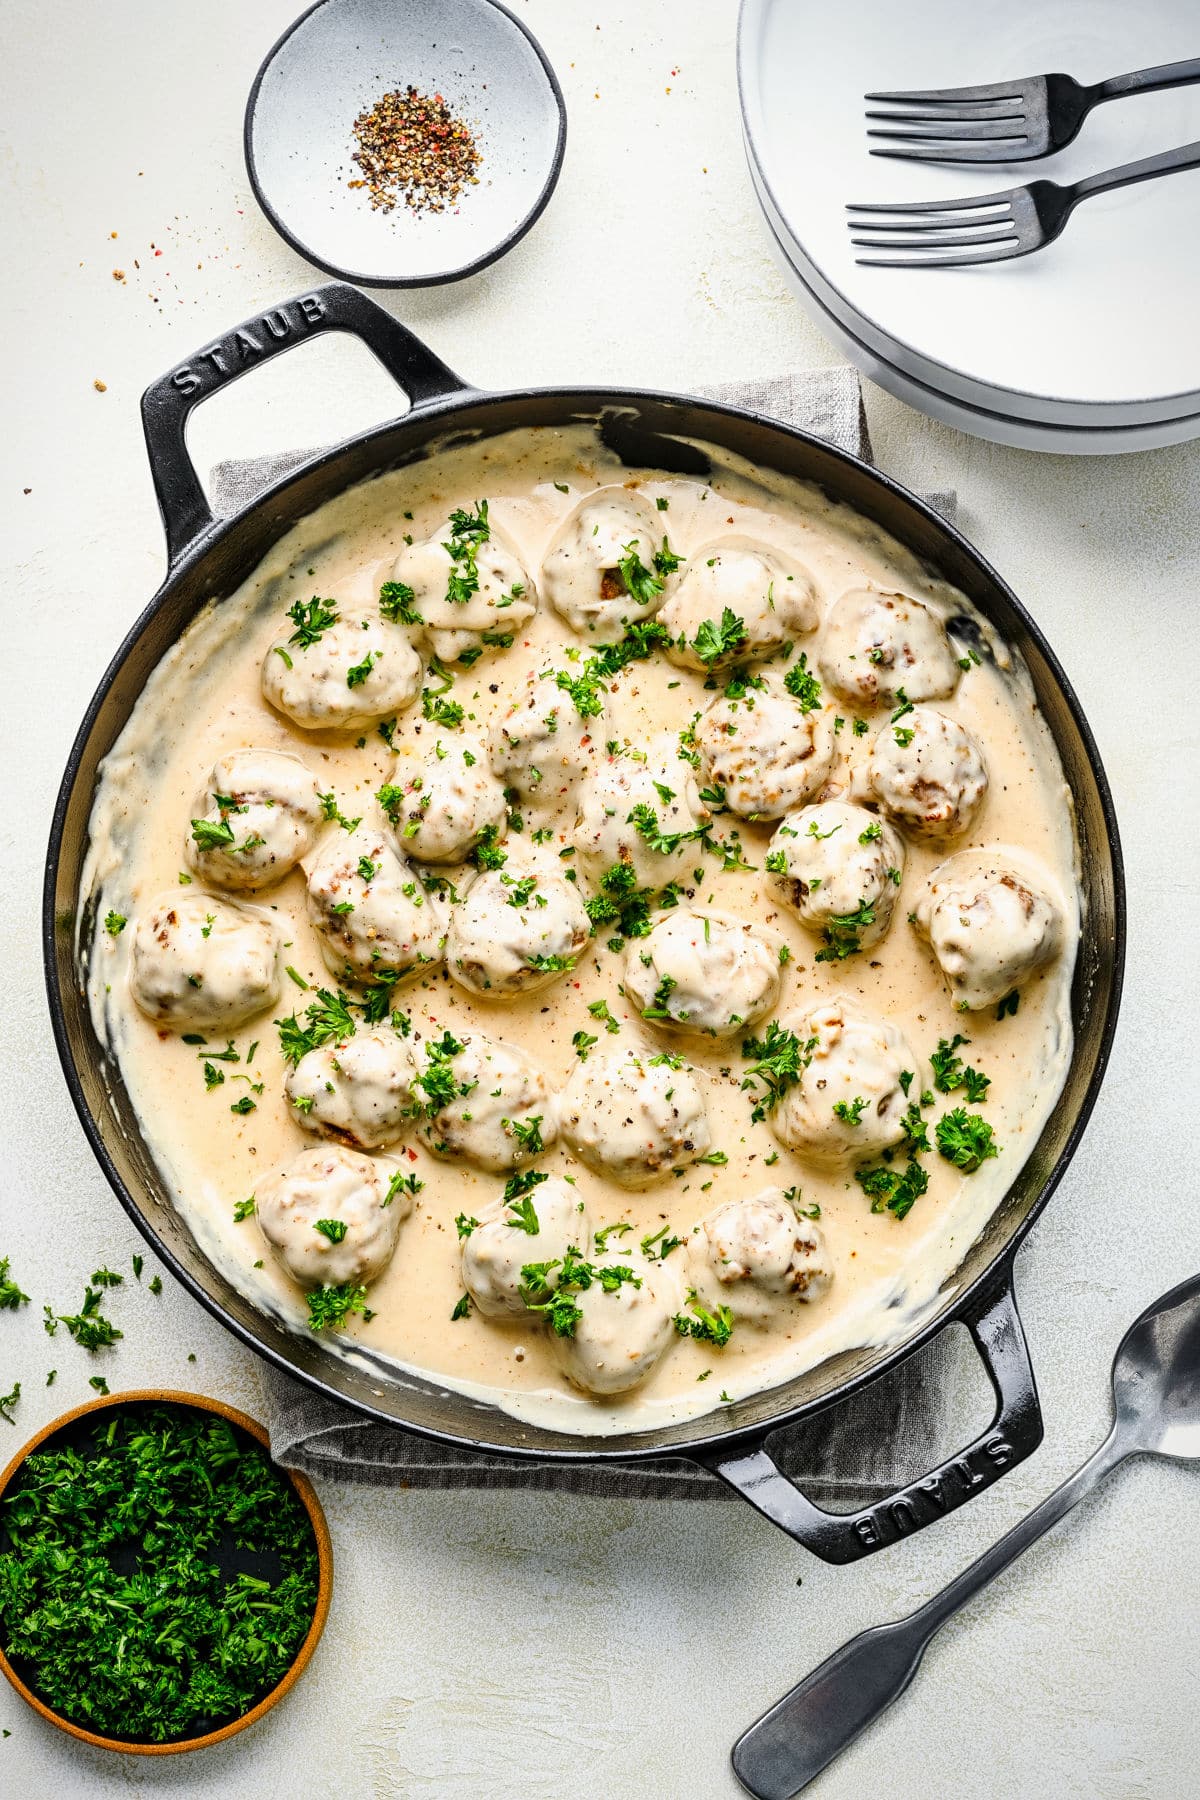 A cast iron pan filled with Swedish meatballs and cream sauce.